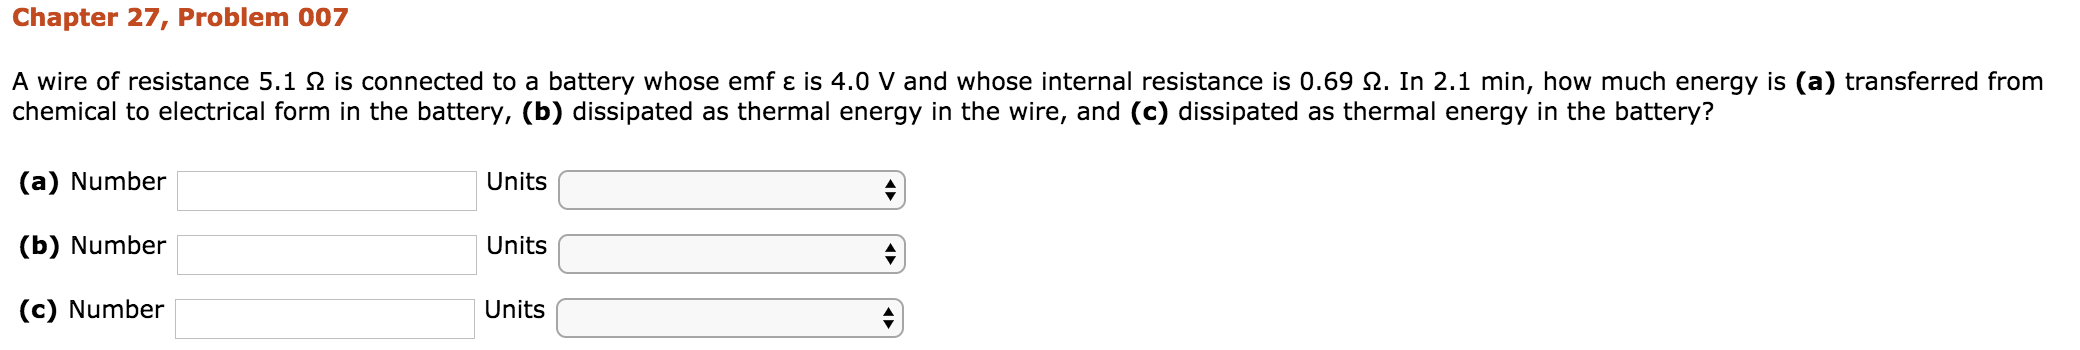 Chapter 27, Problem 007
from
A wire of resistance 5.1 Ω is connected to a battery whose emf ε is 4.0 V and whose internal resistance is 0.69 Ω. In 2.1 min, how much energy is (a) transferred from
eergy In the narerg s()
chemical to electrical form in the battery, (b) dissipated as thermal energy in the wire, and (c) dissipated as thermal energy in the battery?
(a) Number
(b) Number
(c) Number
Units
Units
Units
